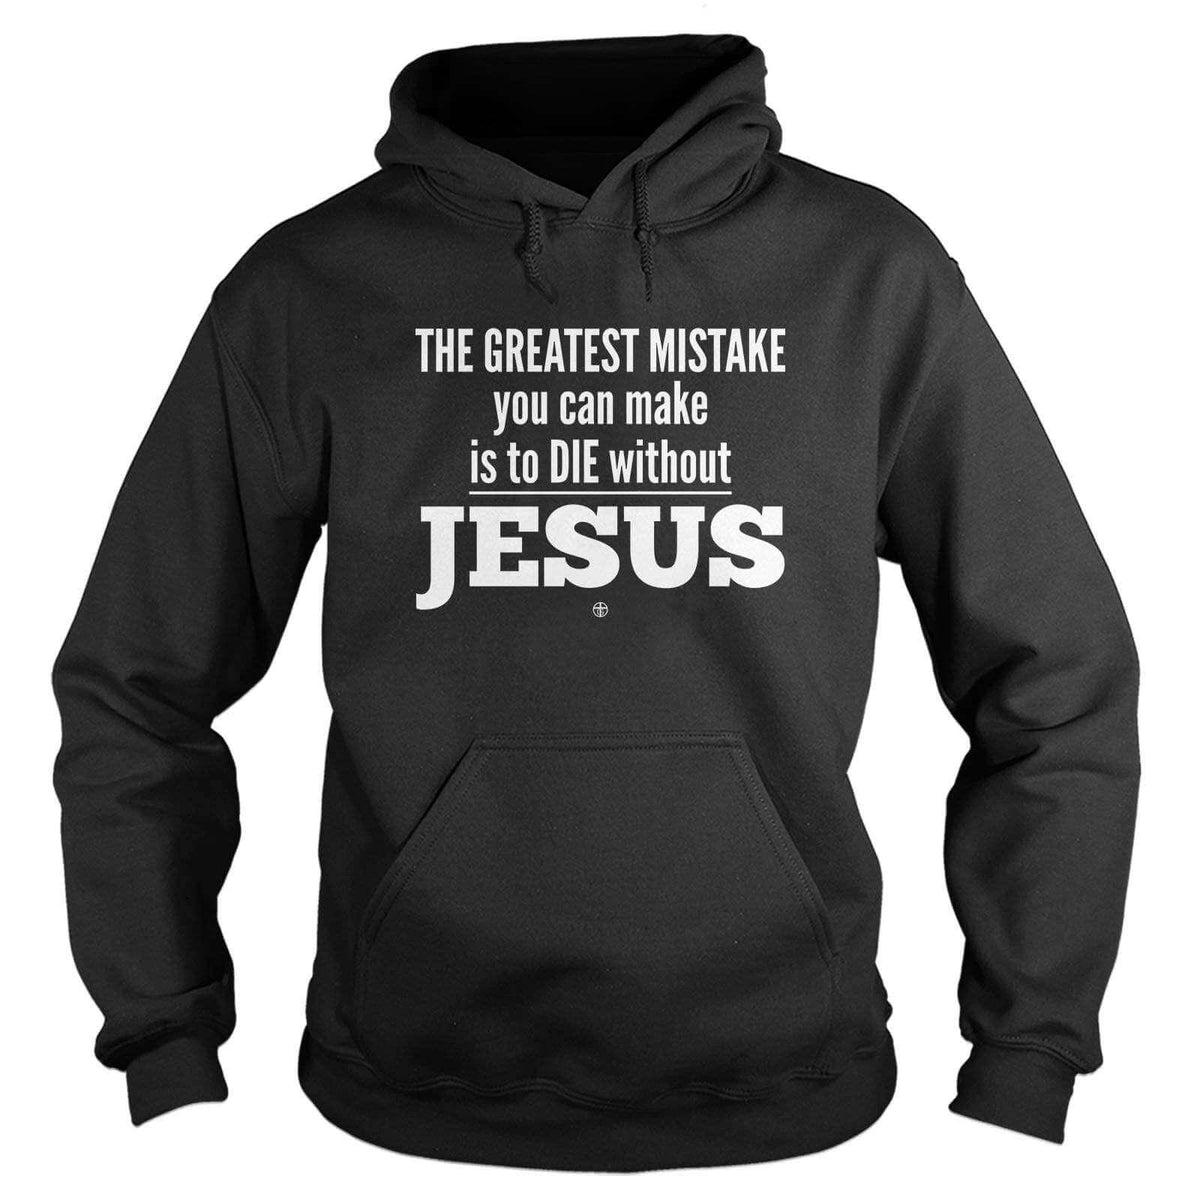 THE GREATEST MISTAKE you can make is to DIE without JESUS Hoodie